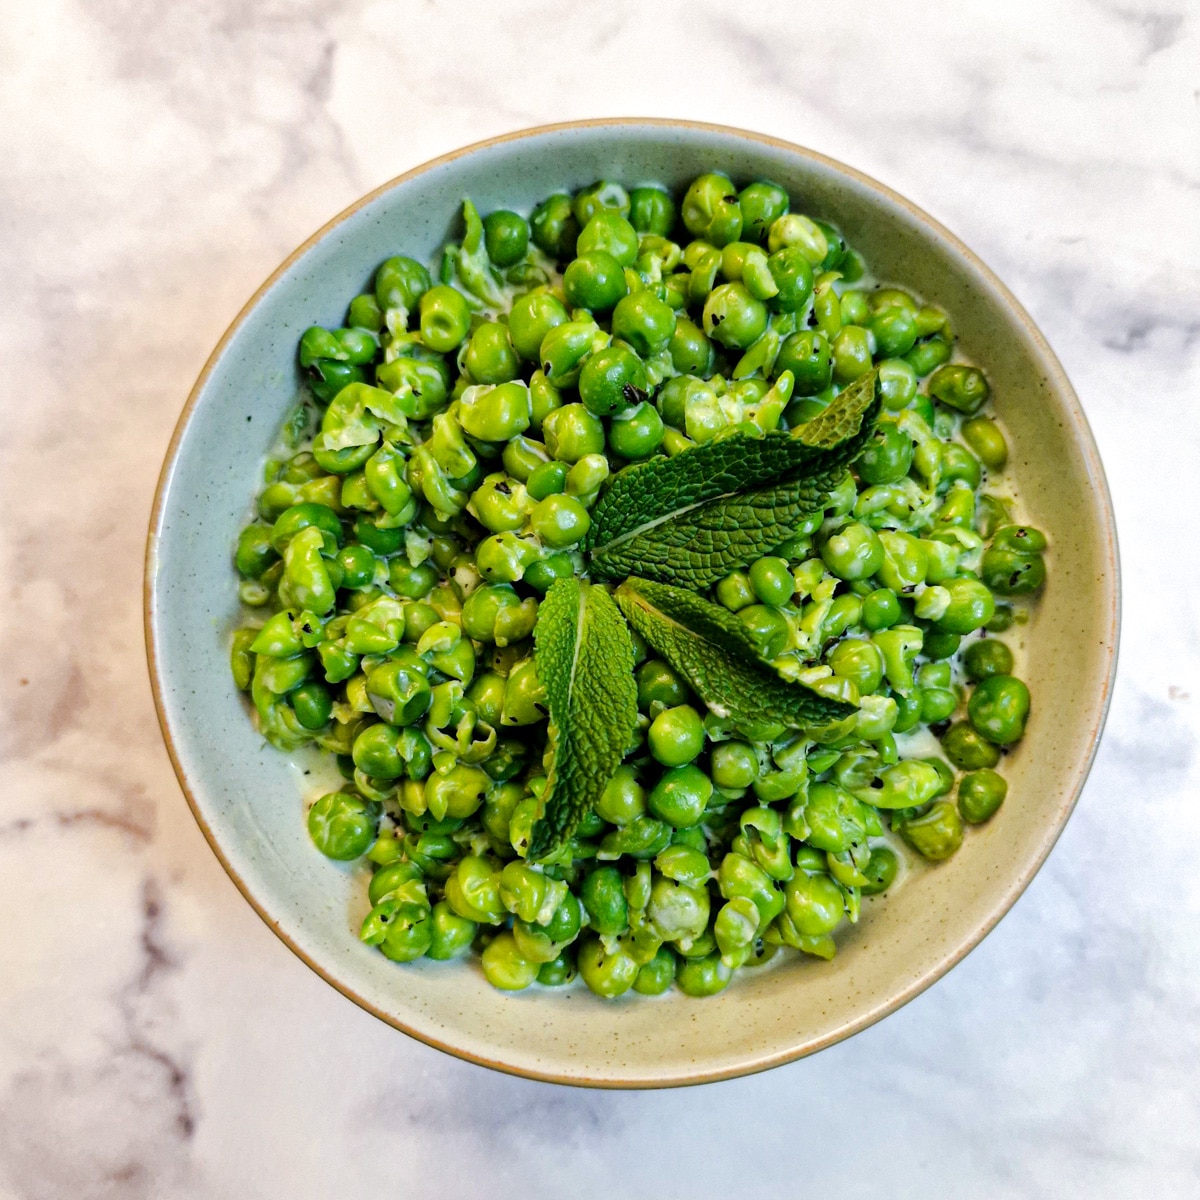 Overhead shot of a small bowl of minted smashed peas garnished with fresh mint leaves.